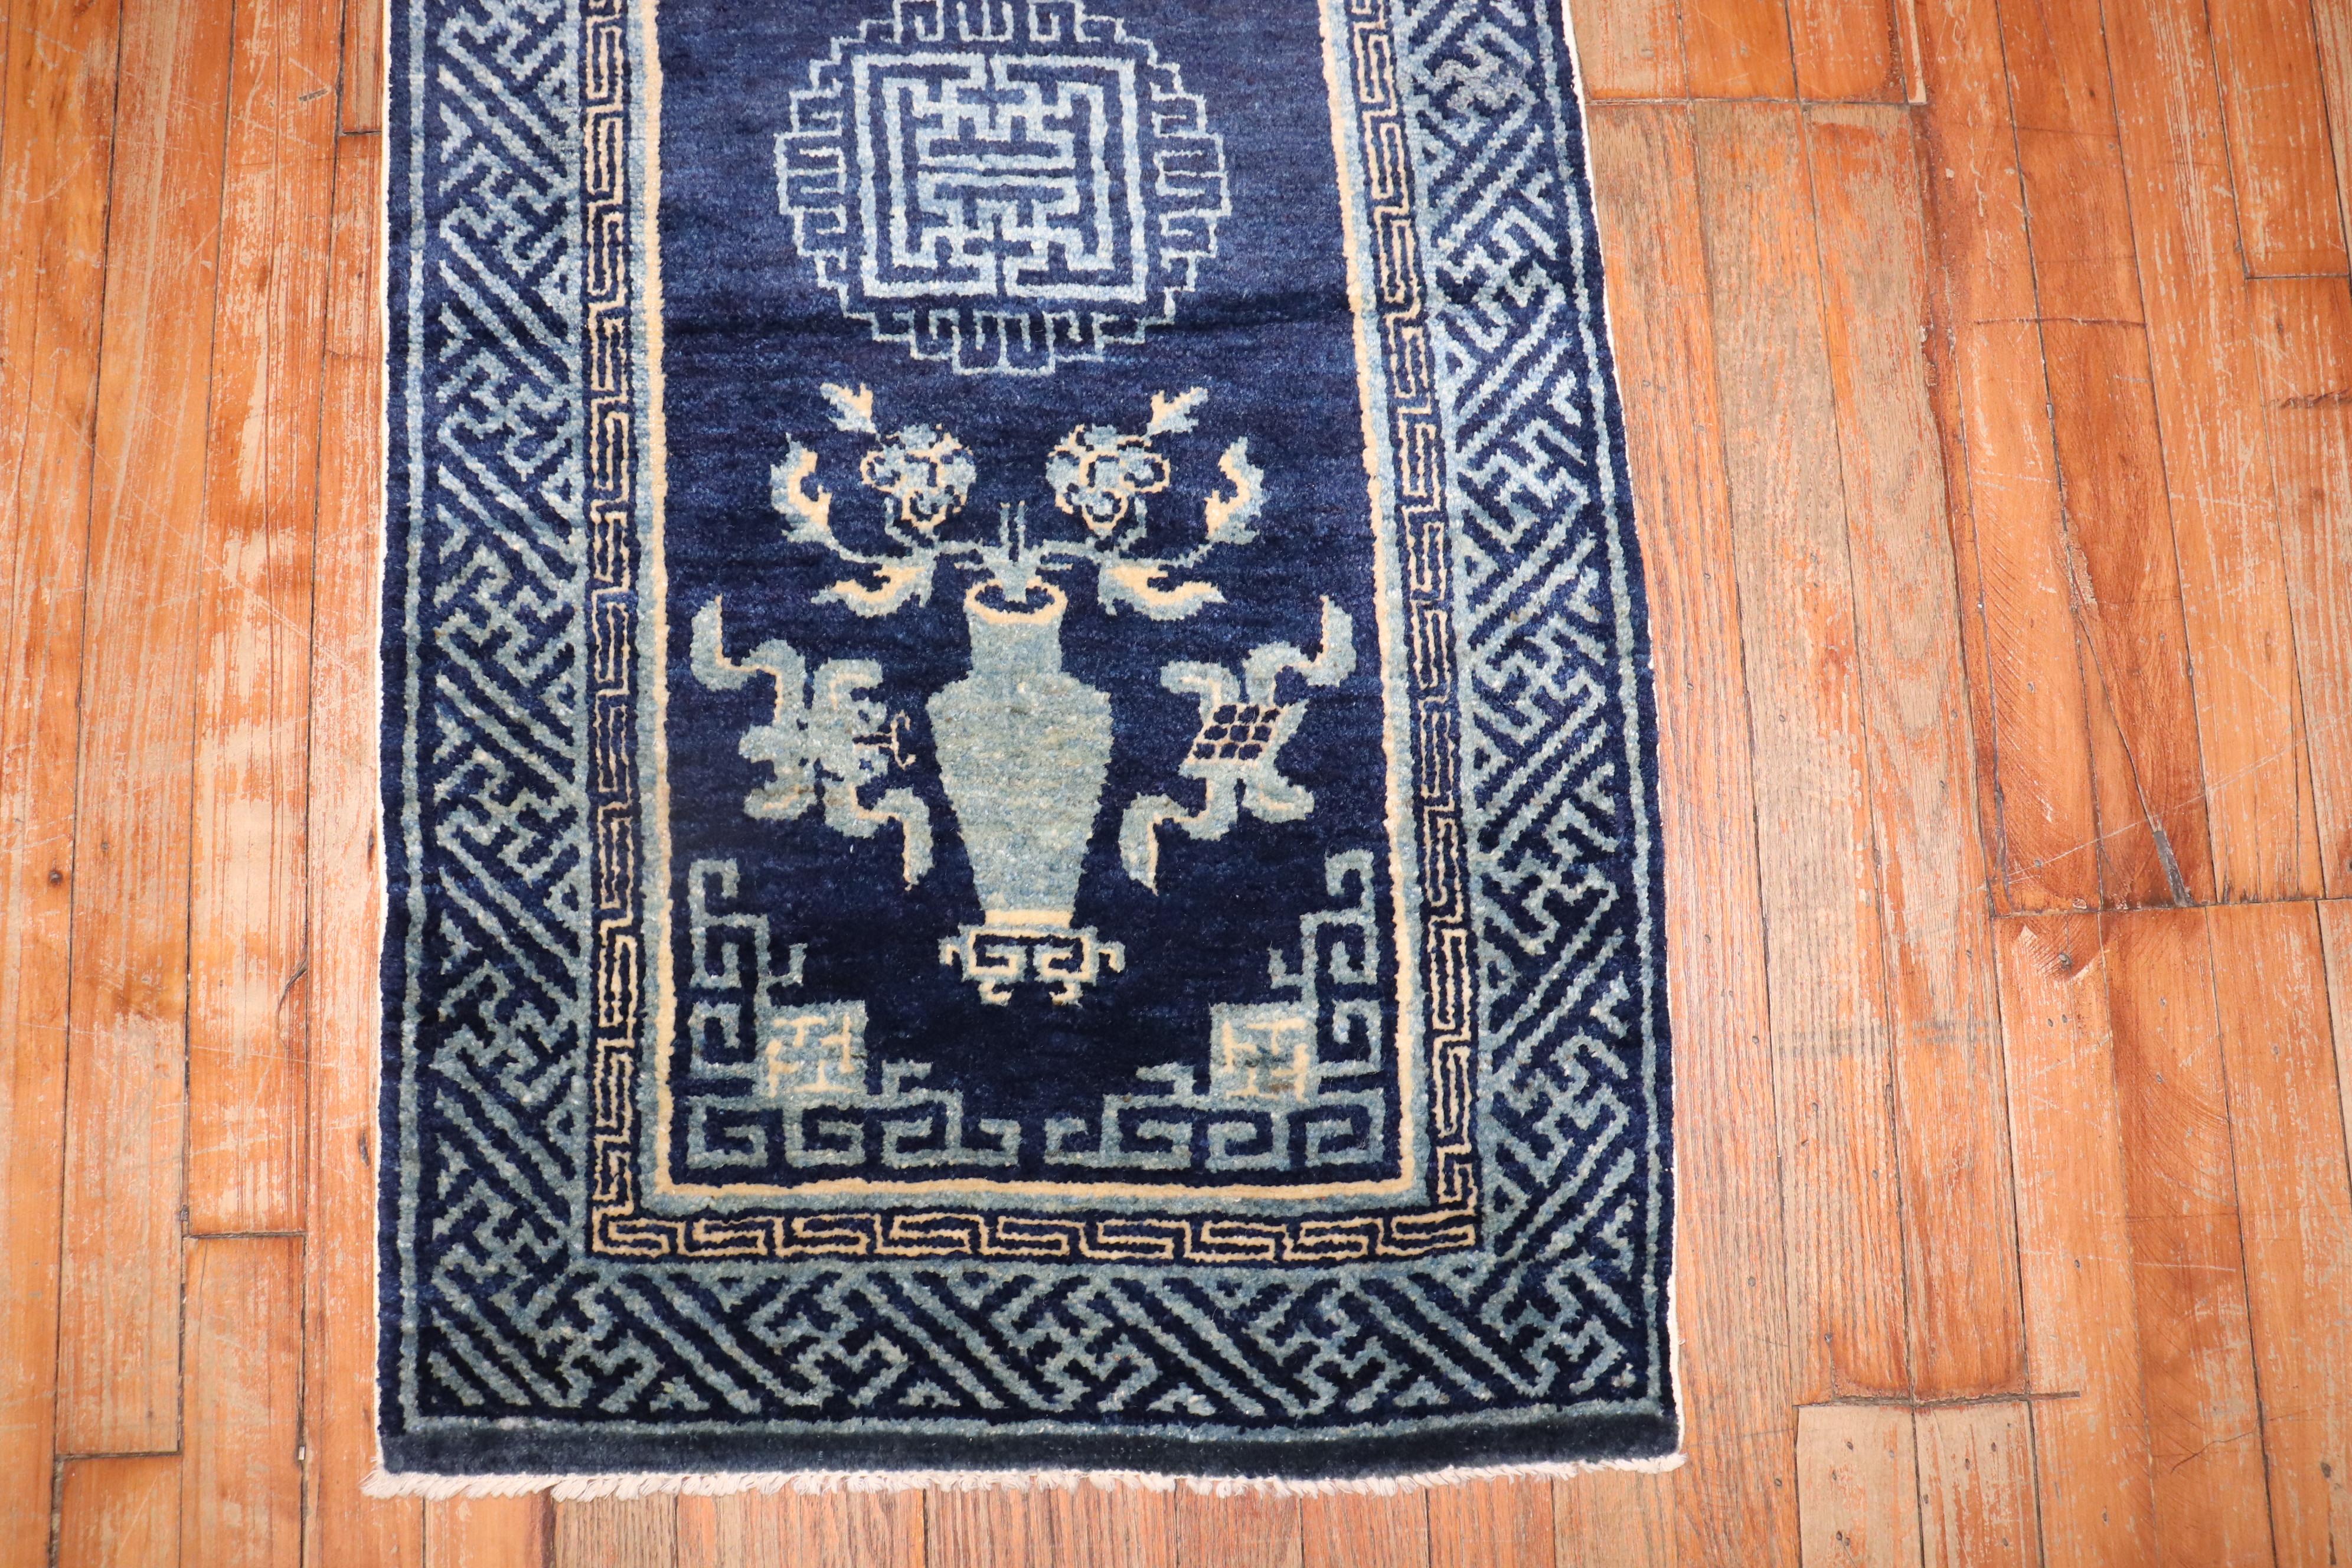 Scatter-size Chinese Peking rug in blue and white from the 2nd quarter of the 20th century.

Measures: 2'1